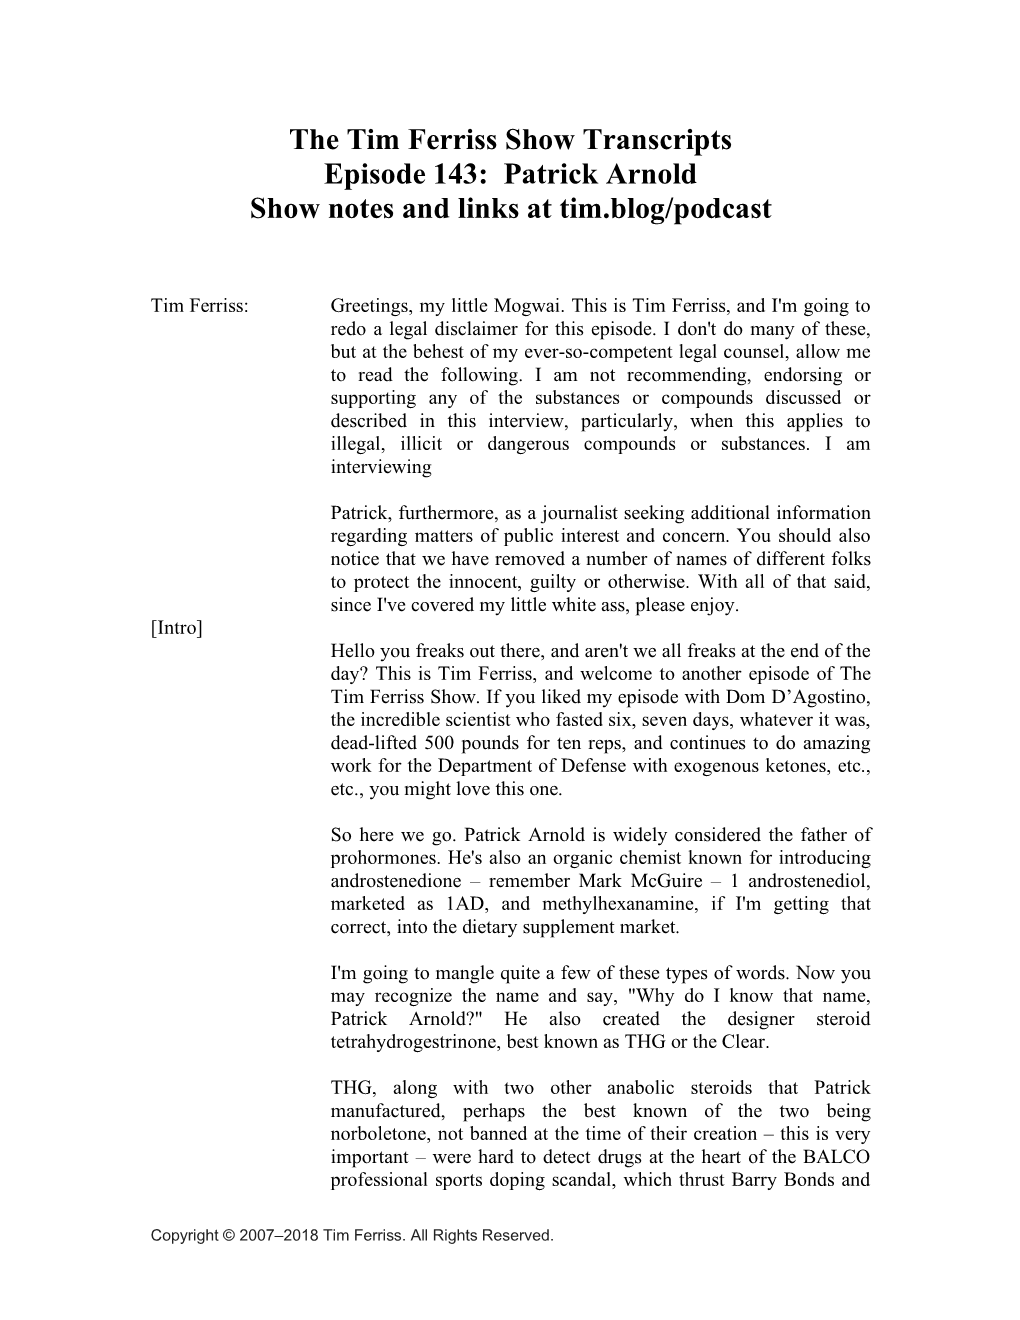 The Tim Ferriss Show Transcripts Episode 143: Patrick Arnold Show Notes and Links at Tim.Blog/Podcast